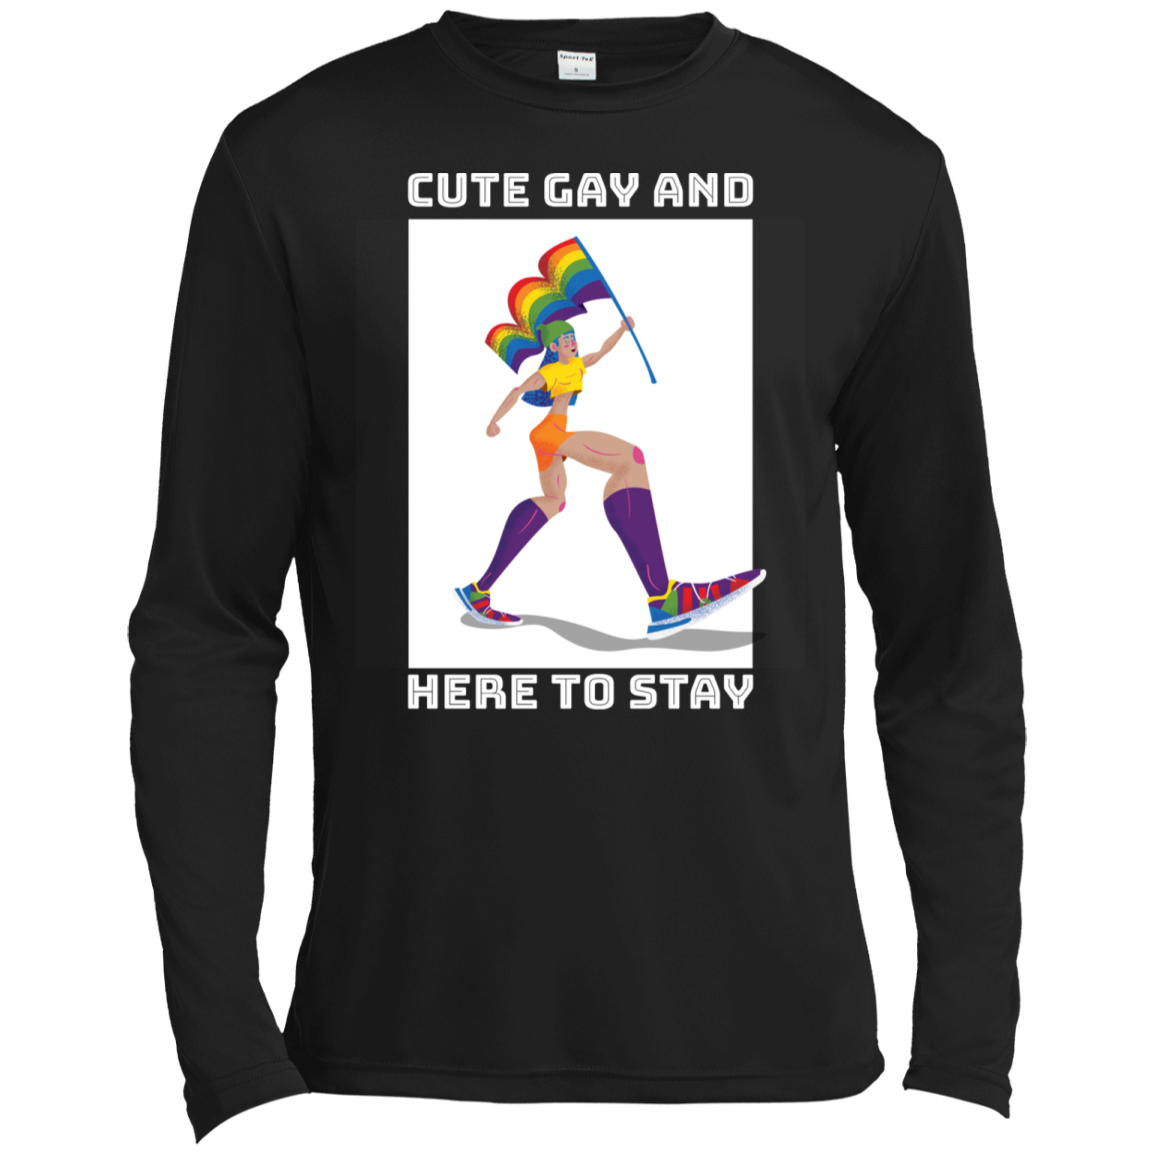 Cute Gay and here to stay